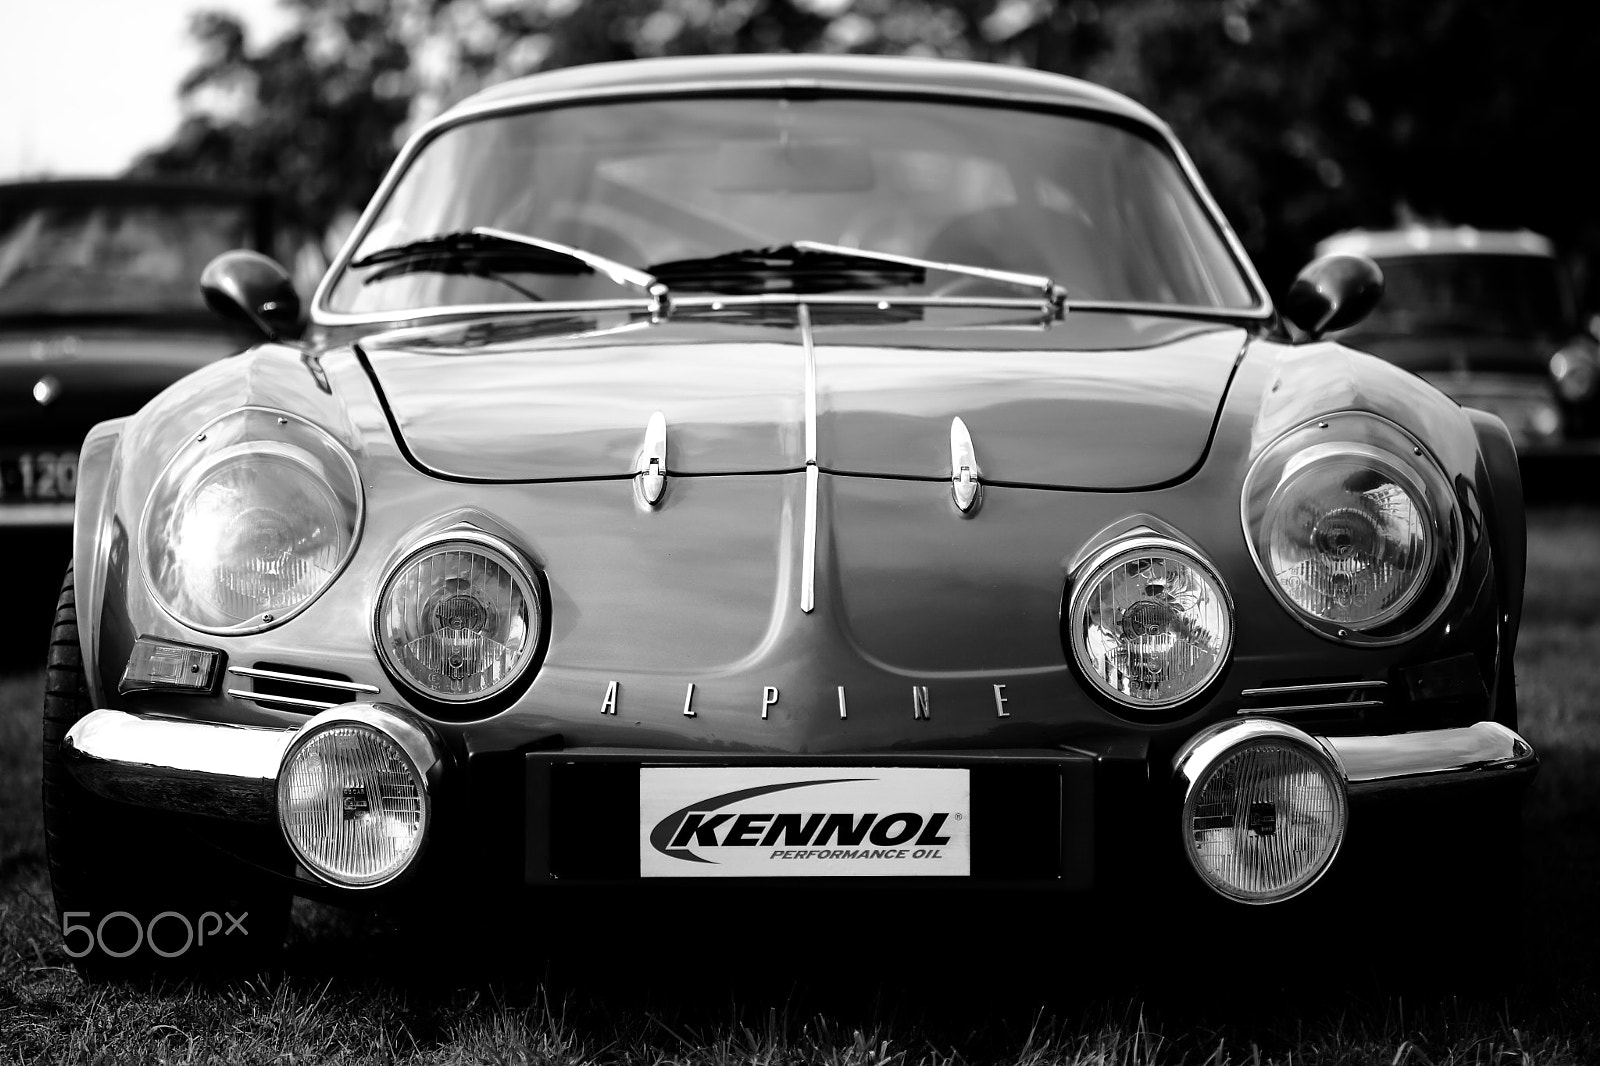 Canon EOS 5D Mark II + Canon EF 100mm F2.8 Macro USM sample photo. Alpine a110 in black and white photography